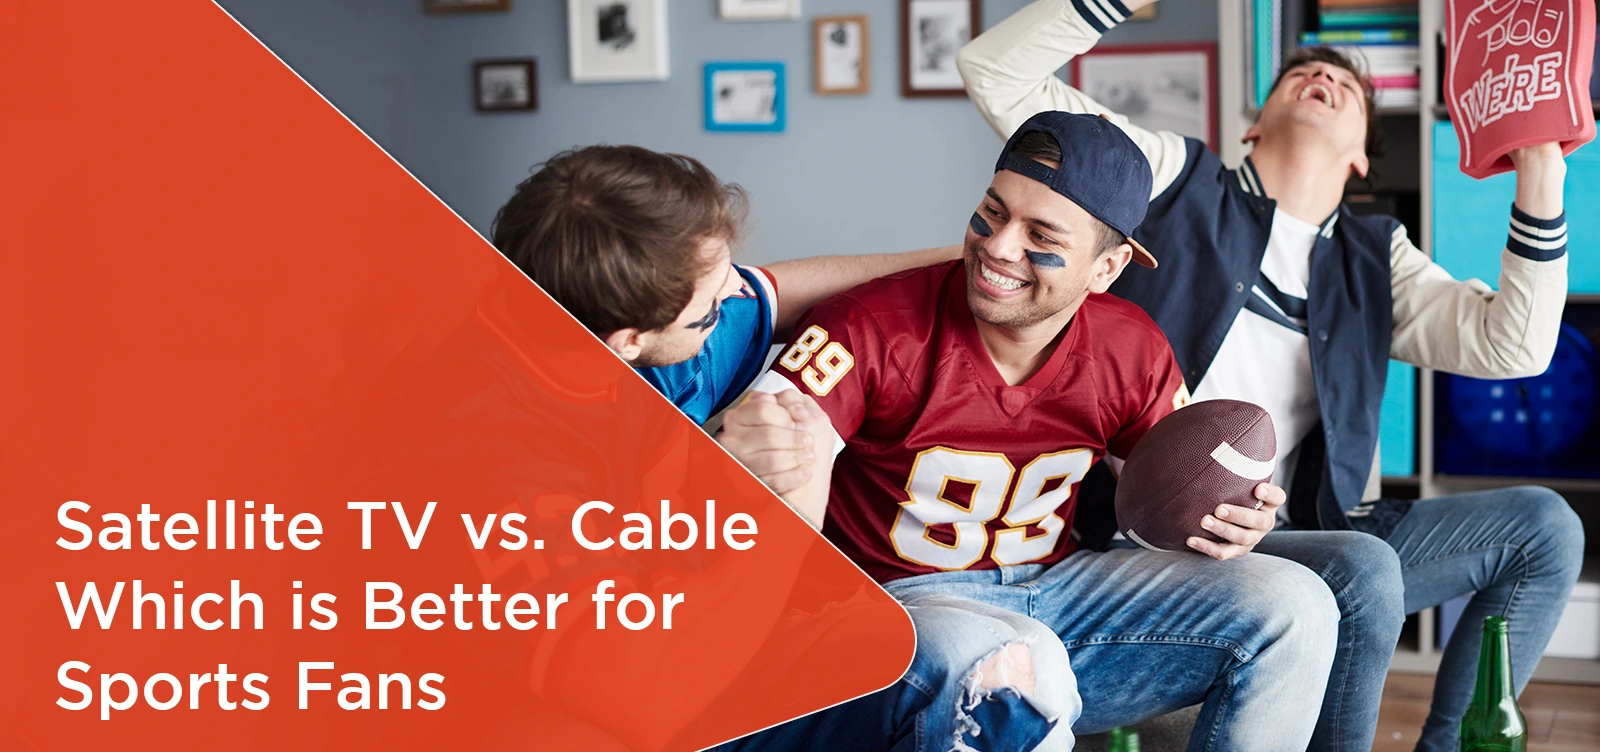 Satellite TV vs. Cable Which is Better for Sports Fans